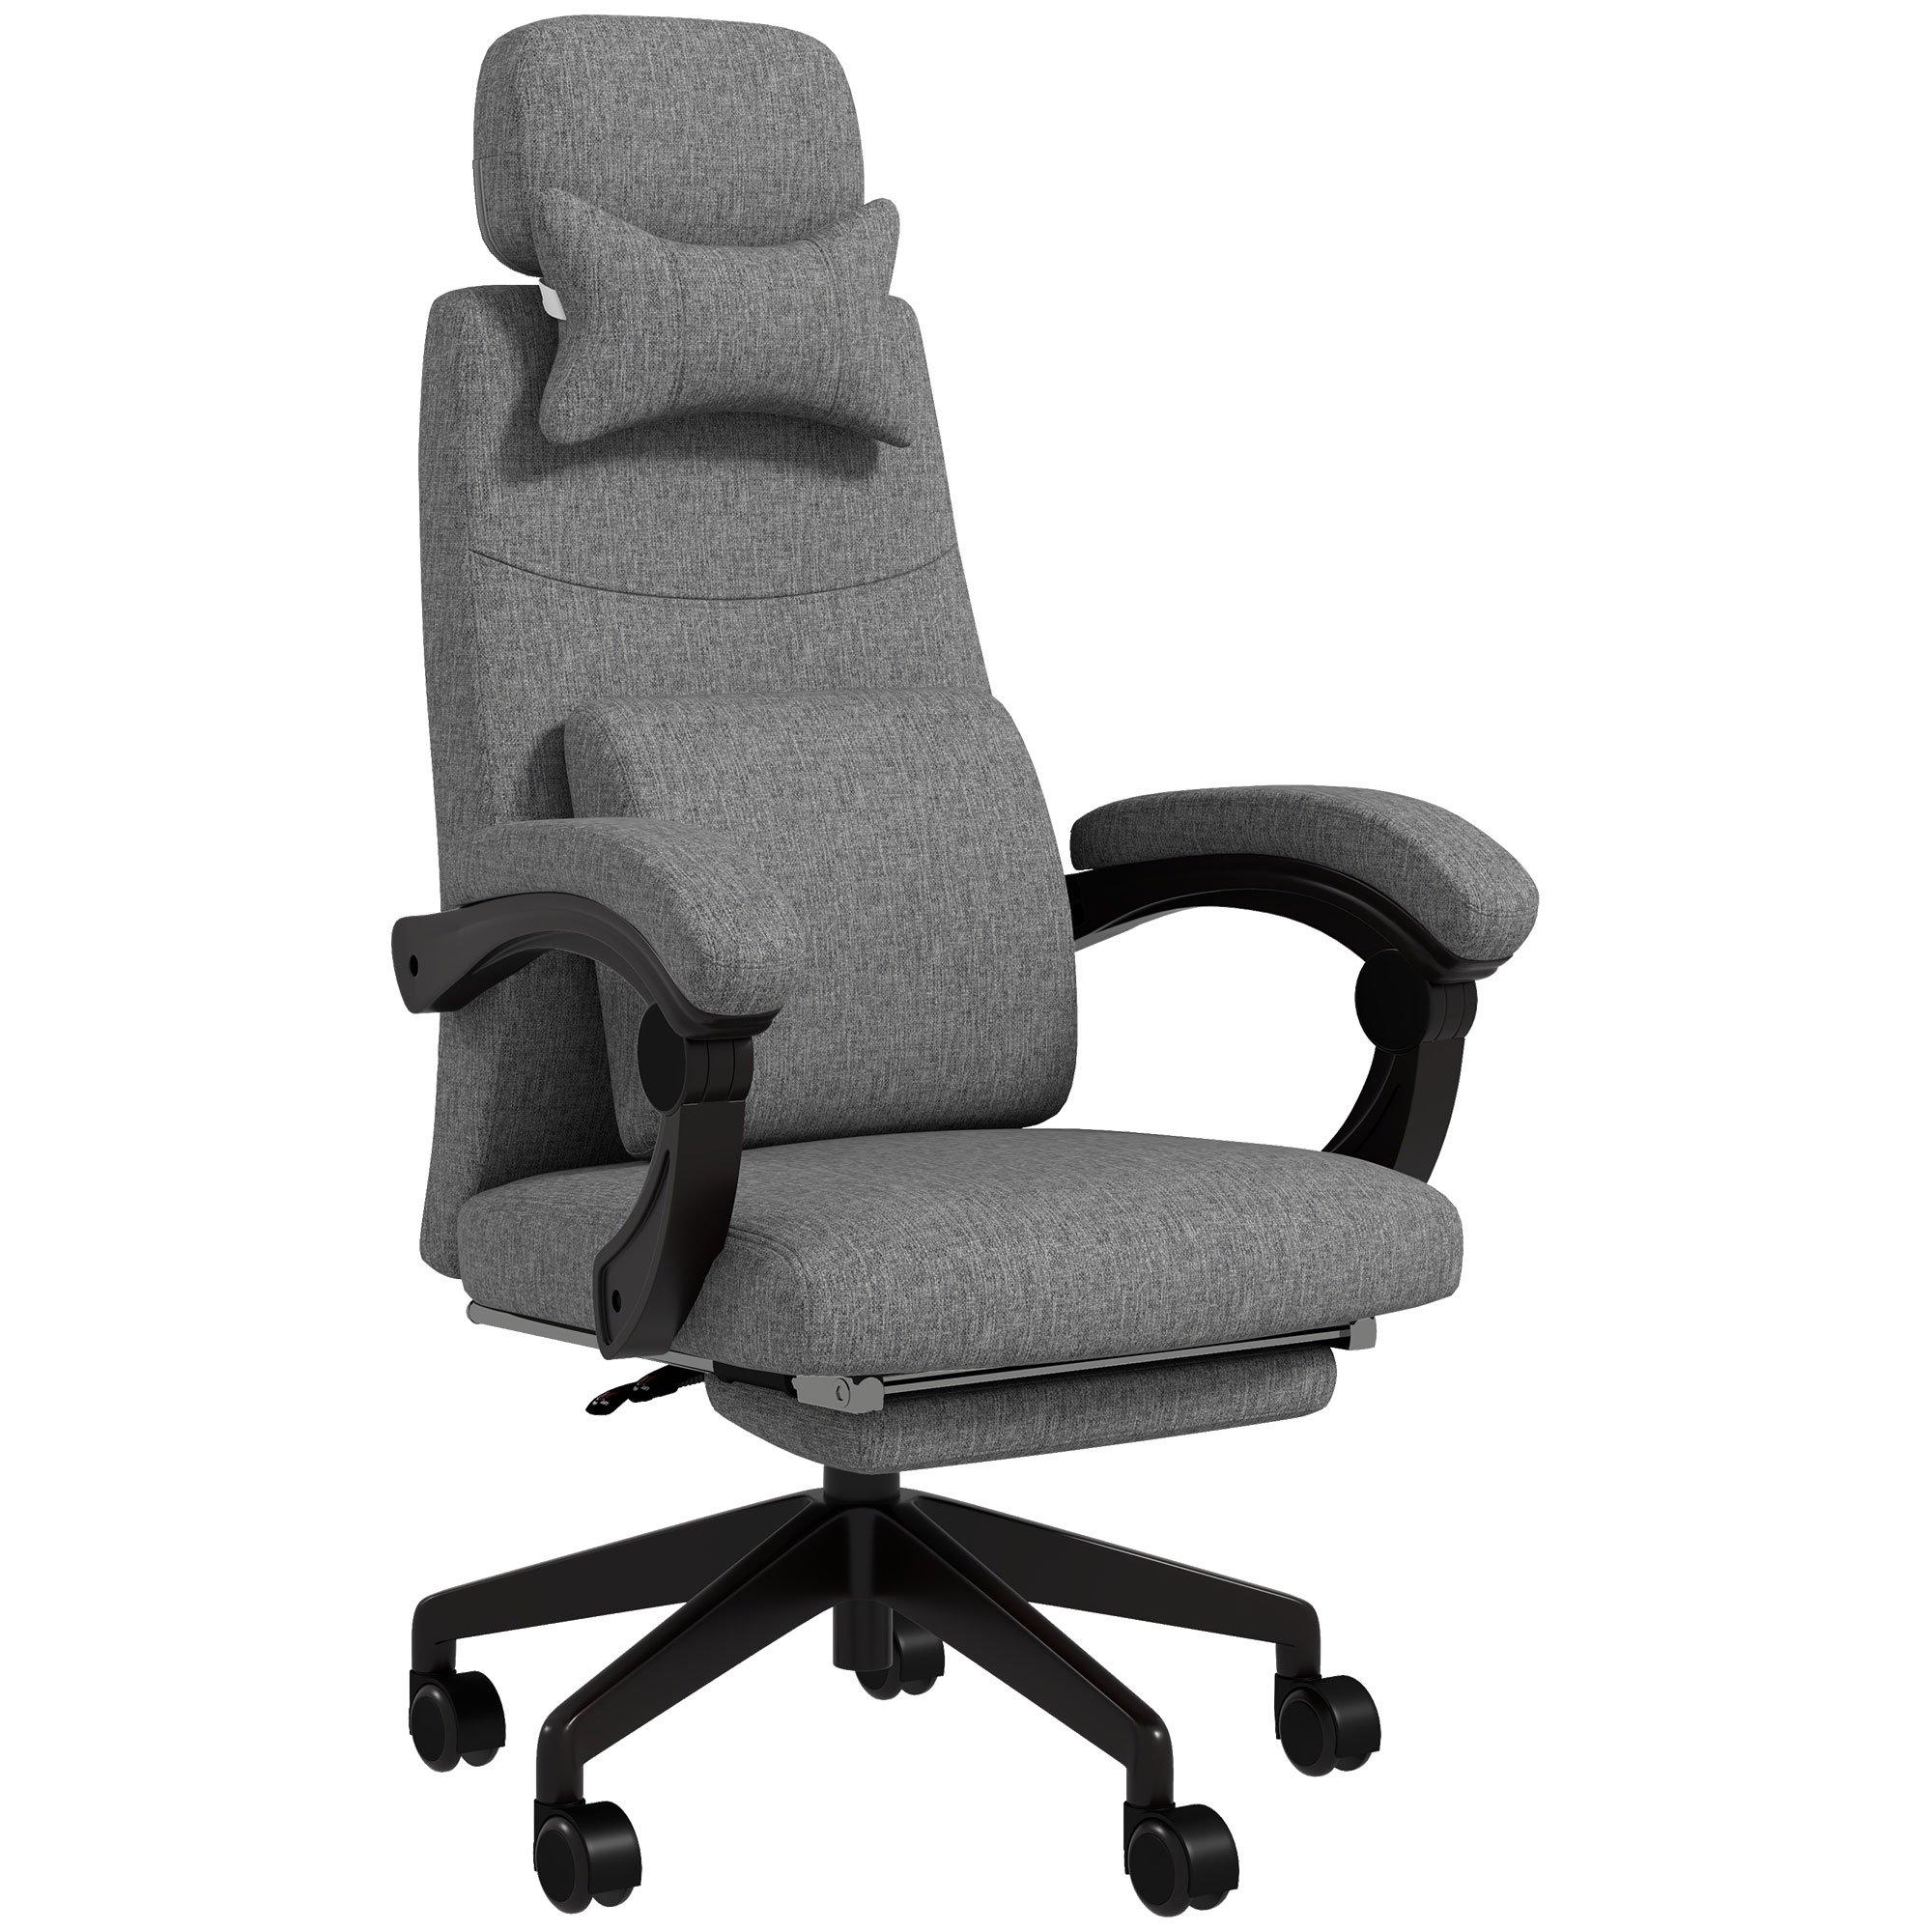 Home Office Chair Swivel Desk Chair with Adjustable Height Footrest